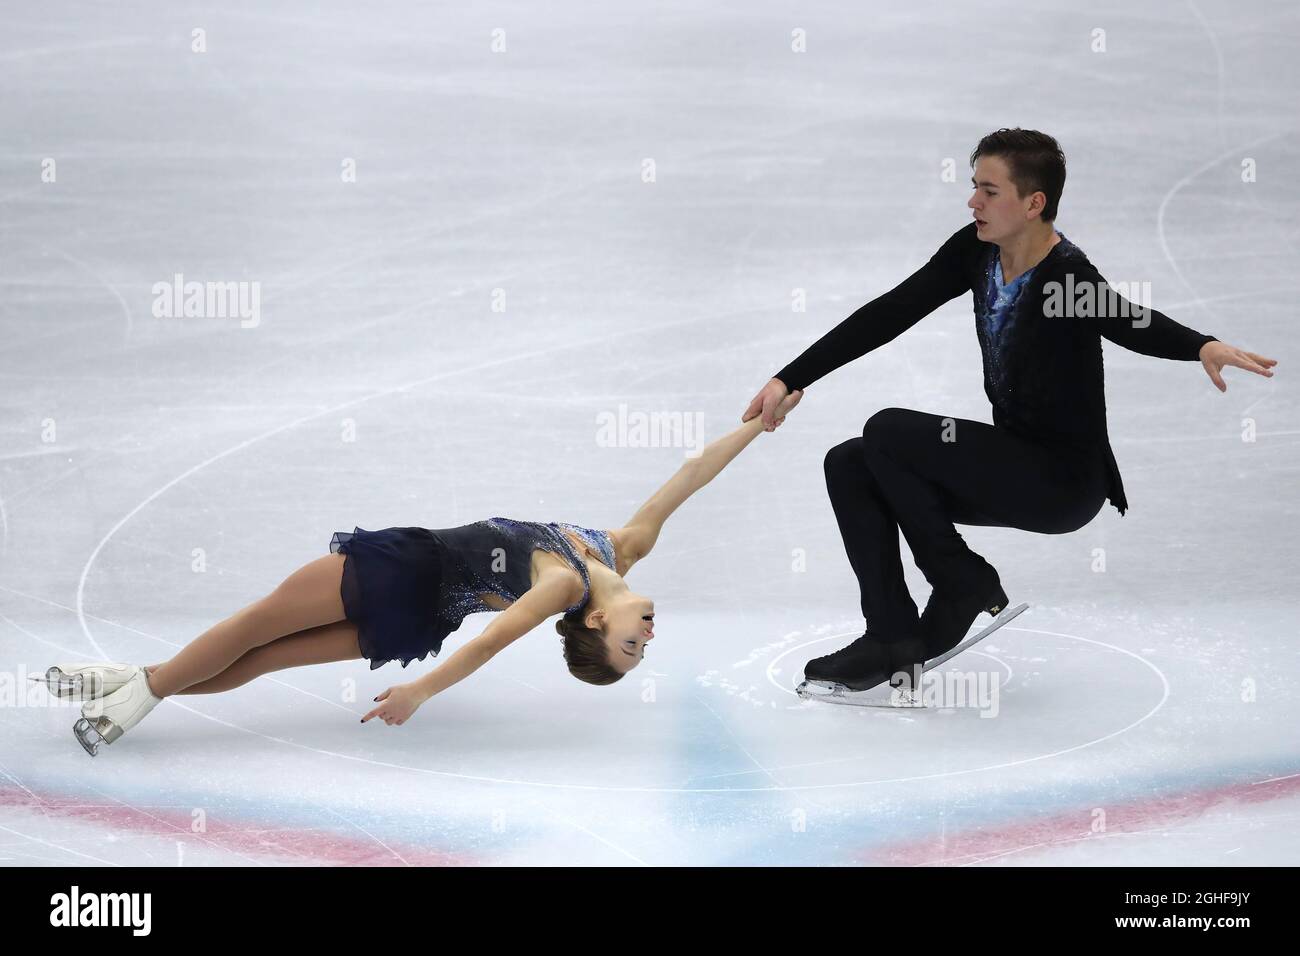 Daria Pavliuchenko and Denis Khodykin of Russia perform at Palavela, Turin. Picture date: 5th December 2019. Picture credit should read: Jonathan Moscrop/Sportimage via PA Images Stock Photo